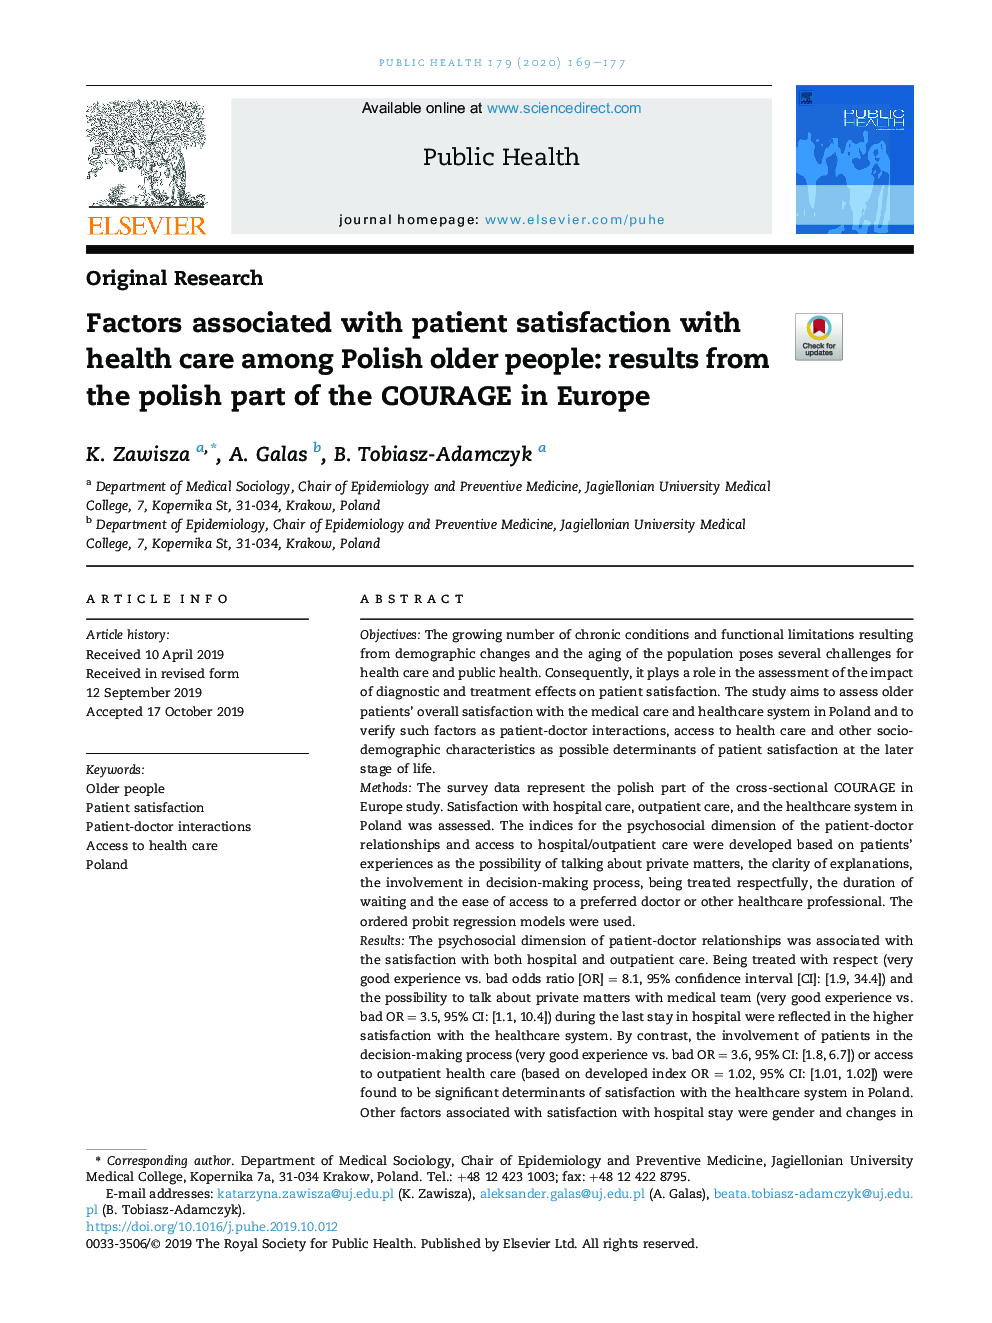 Factors associated with patient satisfaction with health care among Polish older people: results from the polish part of the COURAGE in Europe